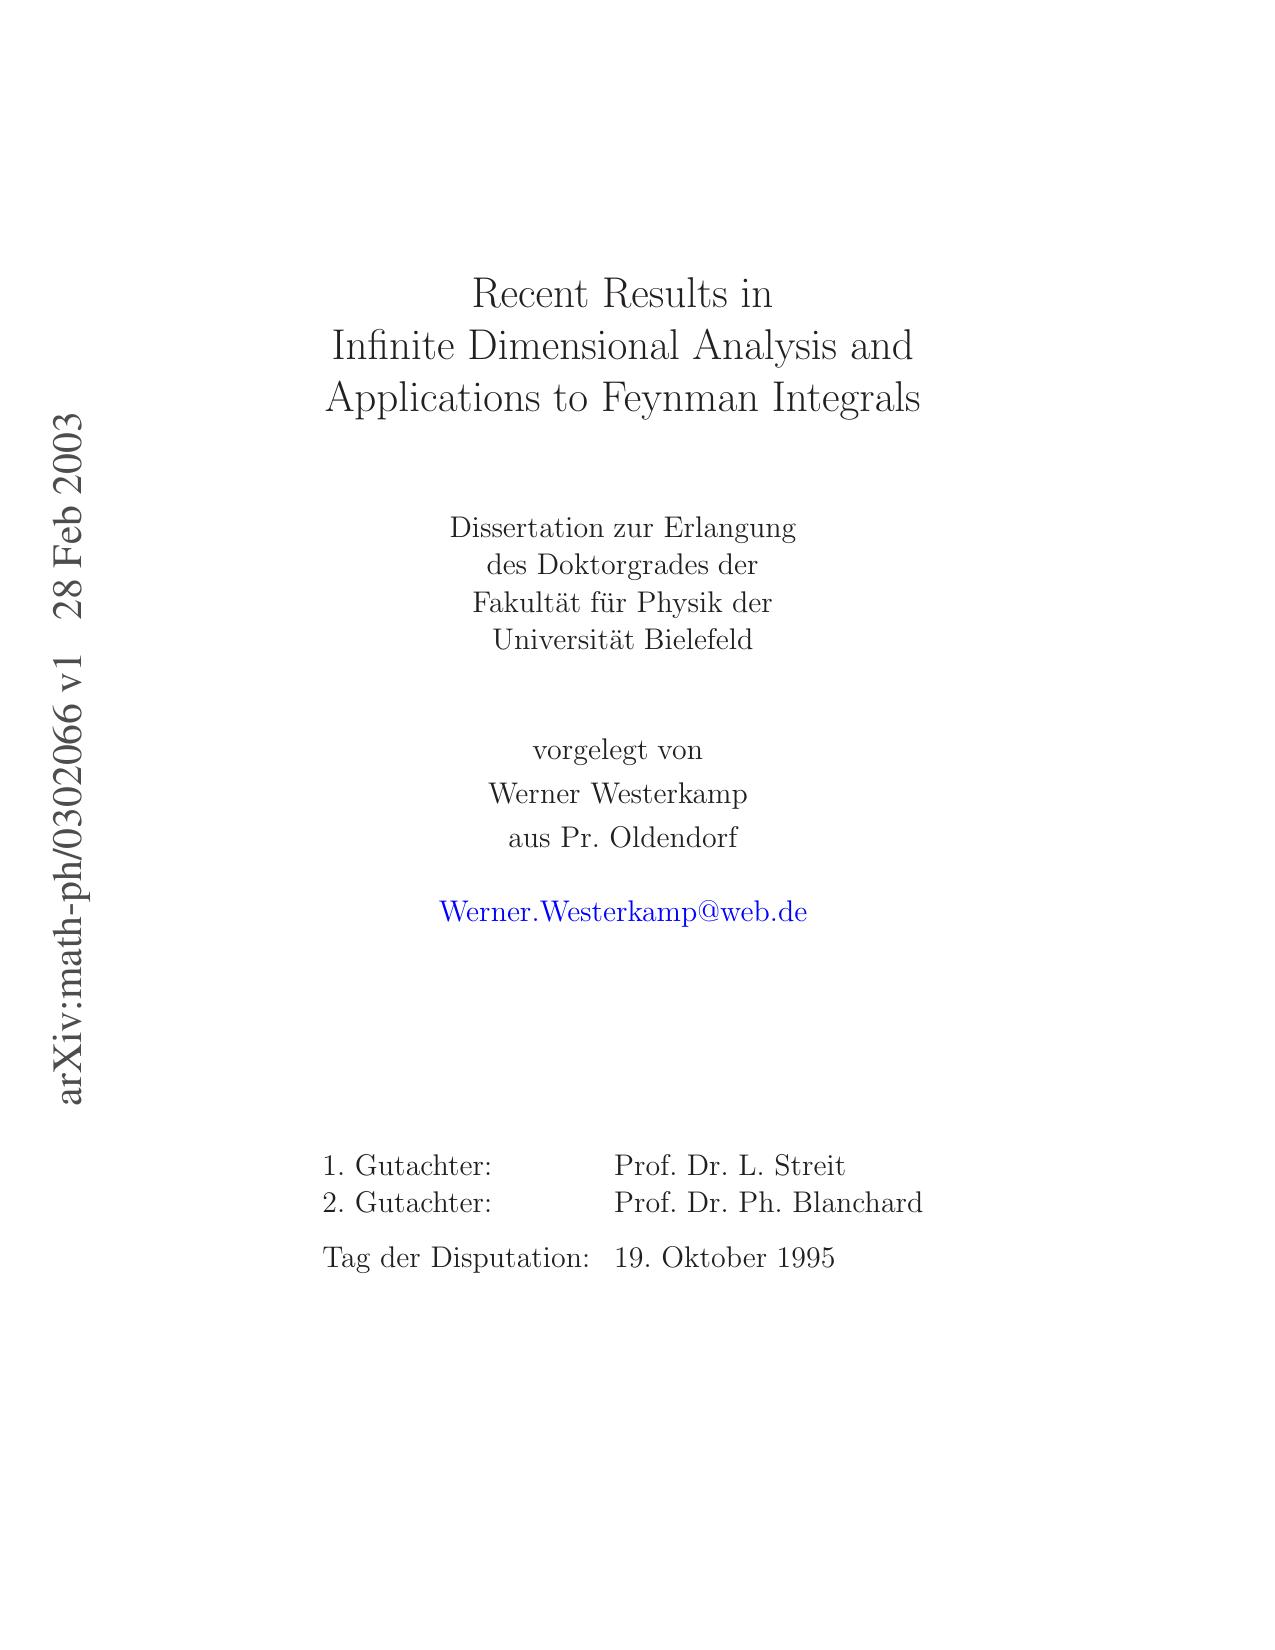 Recent Results in Infinite Dimensional Analysis and Applications to Feynman Integrals - Dissertation